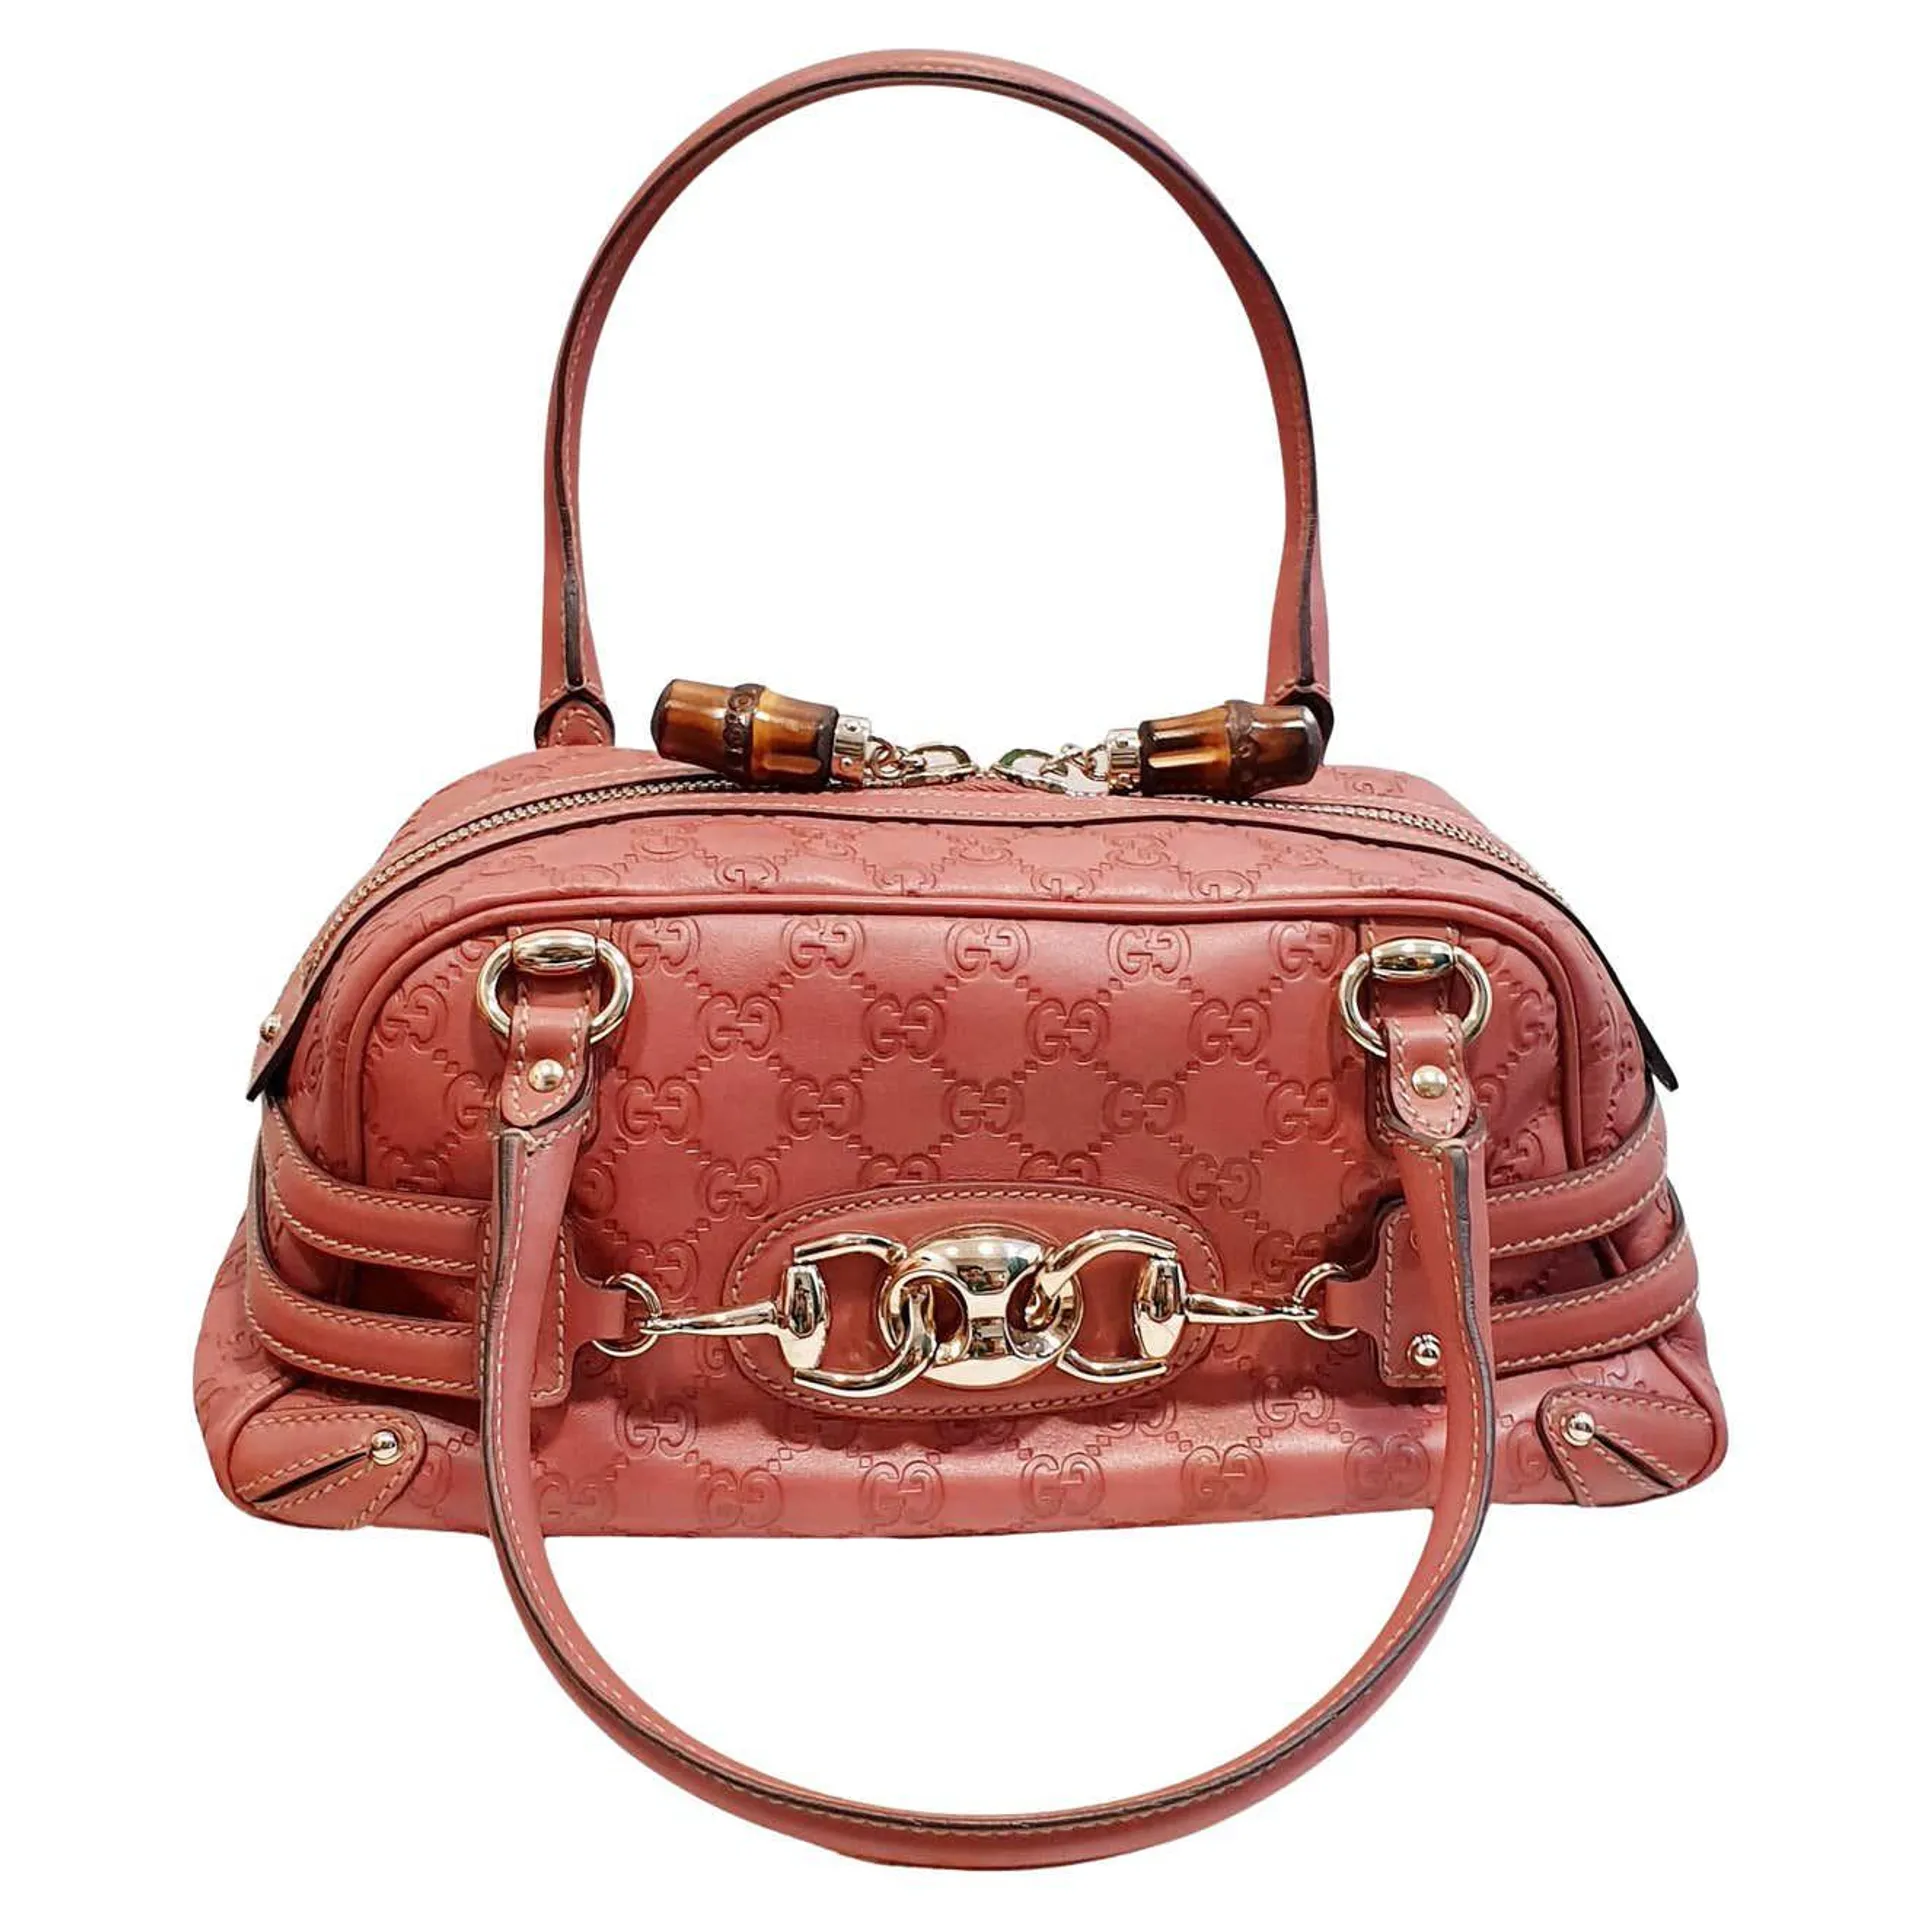 Gucci Pink Leather Bag With Bamboo Closure and big golden horsebit logo